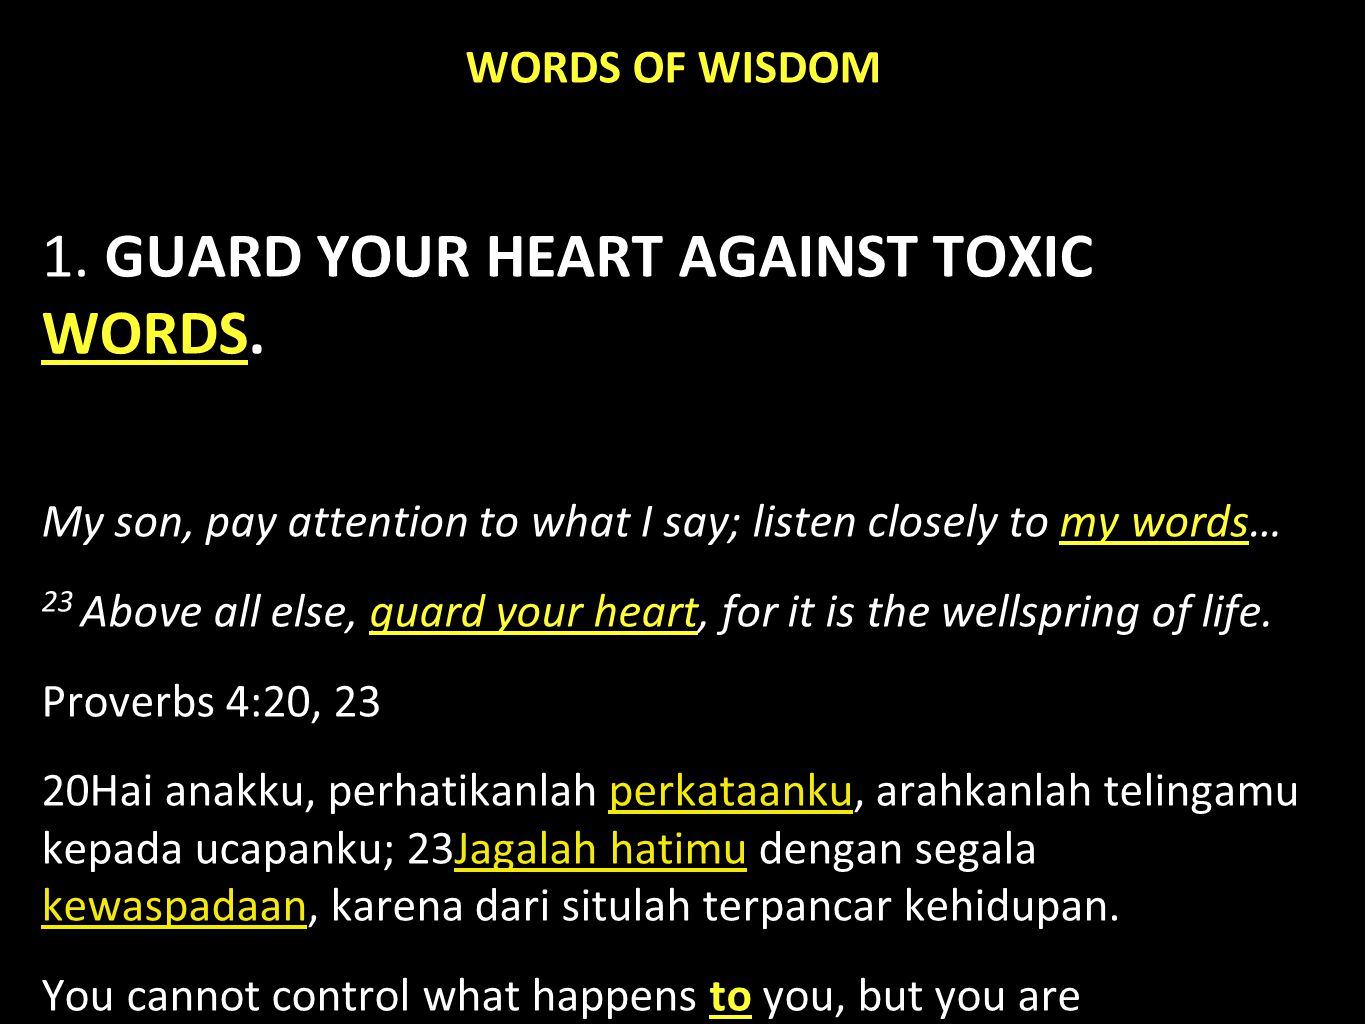 WORDS OF WISDOM 1. GUARD YOUR HEART AGAINST TOXIC WORDS.